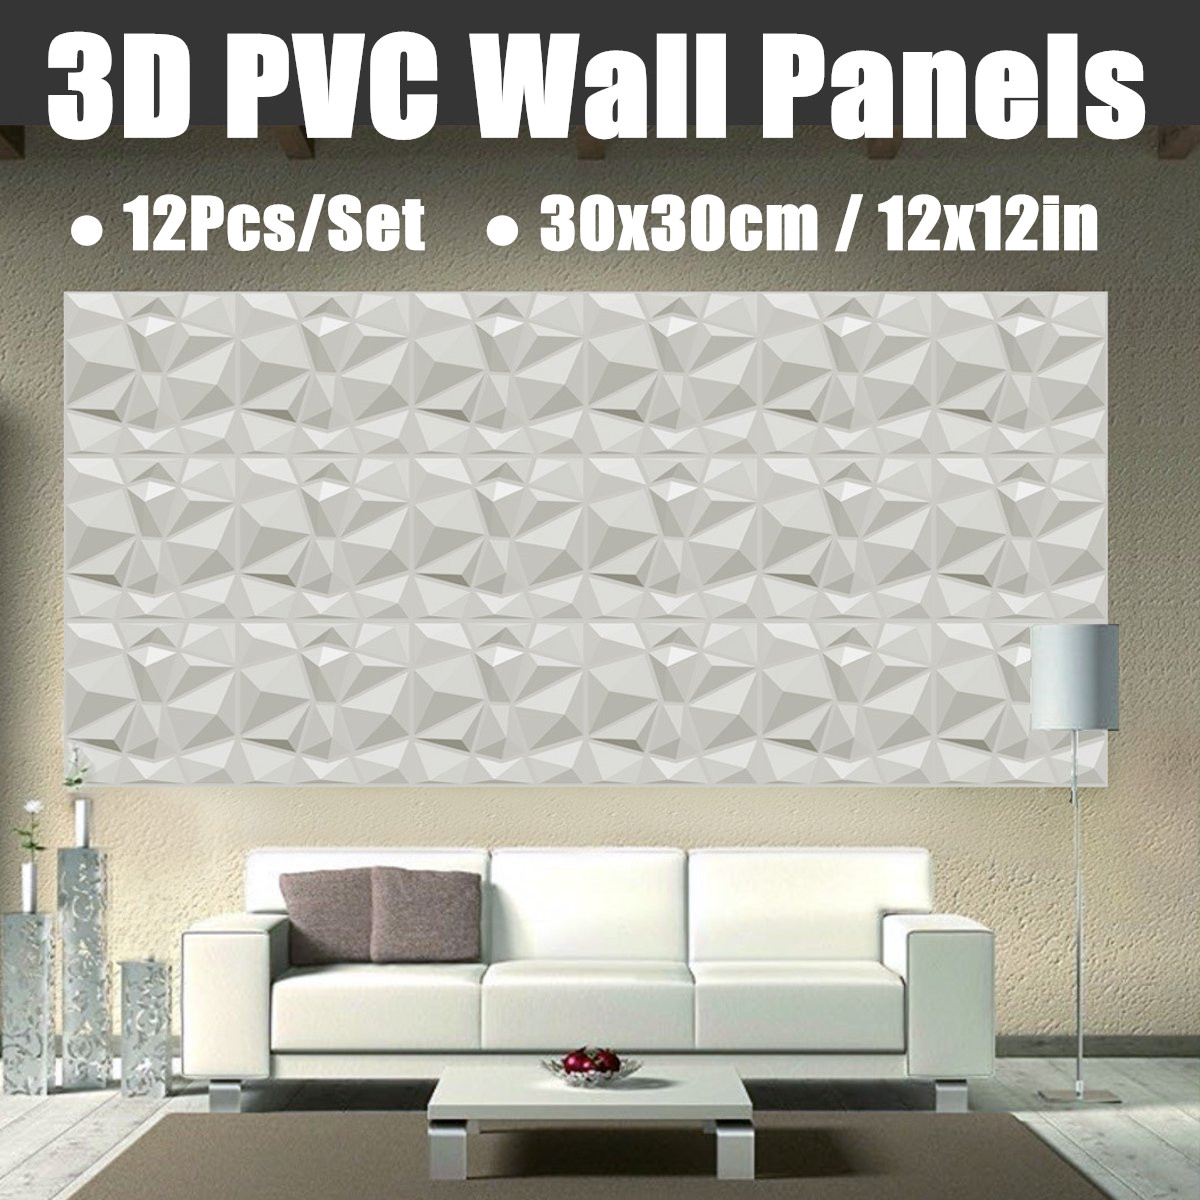 12PcsSet-PVC-3D-Wall-Panels-Embossed-Home-Room-Decal-Background-Decor-12x12inch-1822600-1